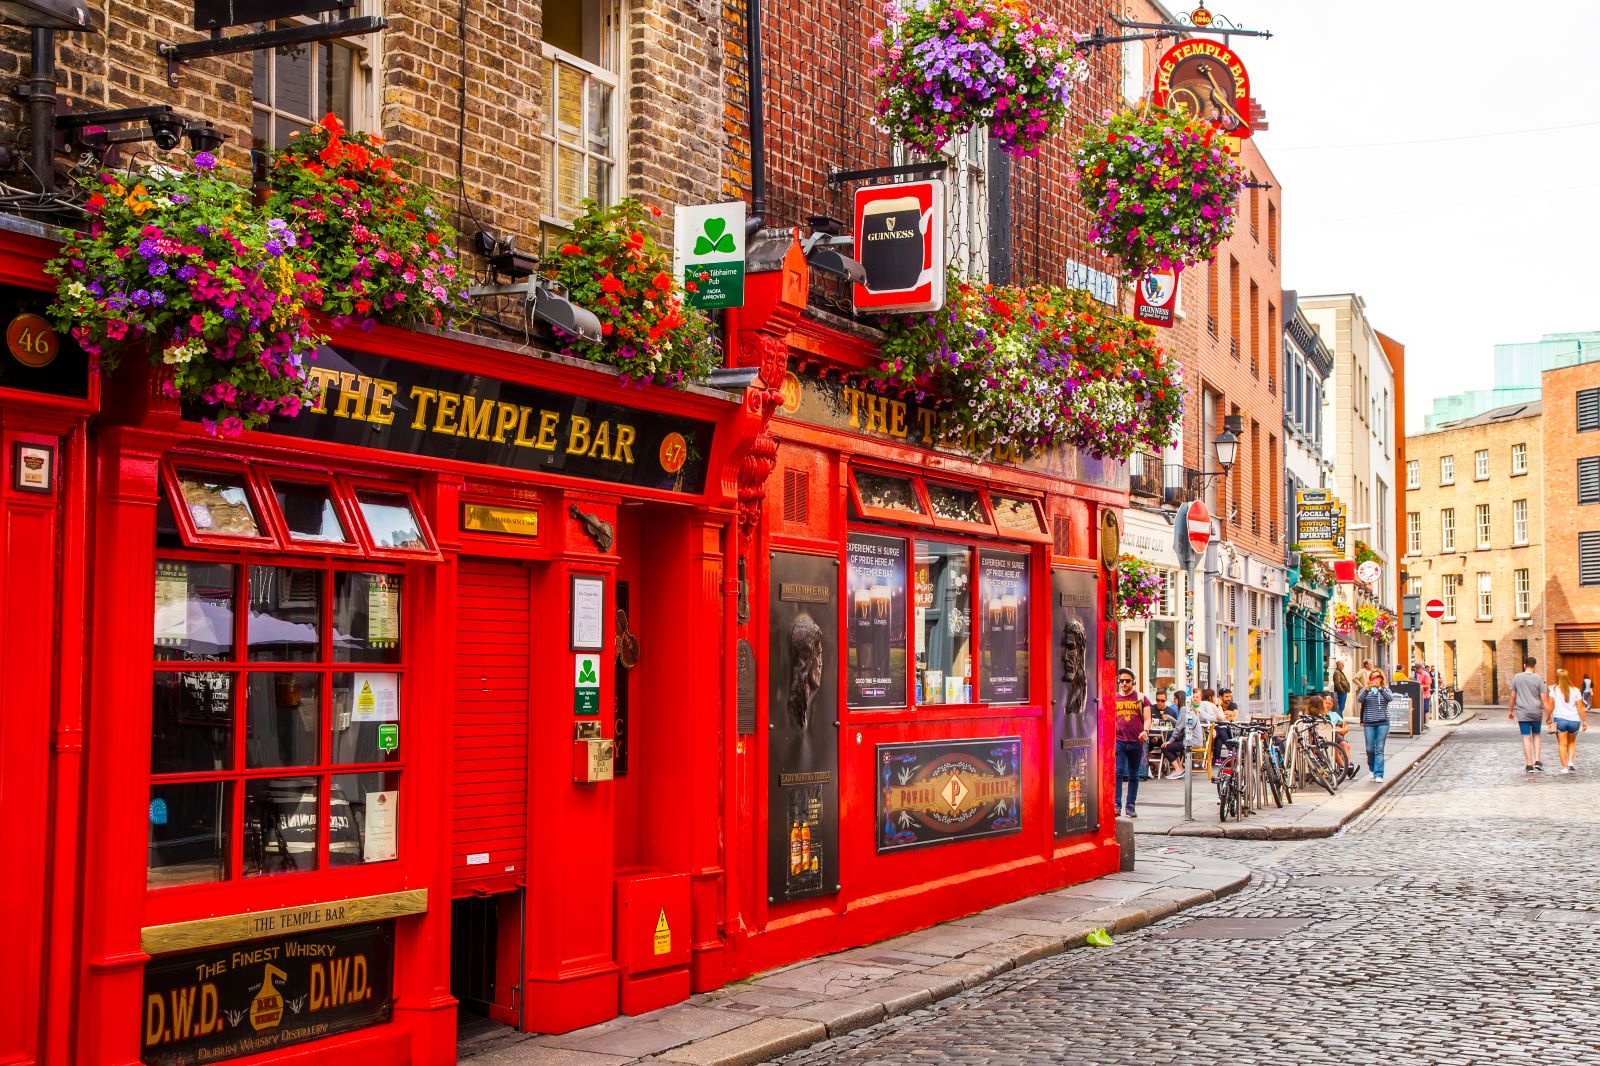 <p class="wp-caption-text">Image credit: Shutterstock / Arcady</p>  <p>Temple Bar is the cultural heartbeat of Dublin, renowned for its lively atmosphere. Enjoy a night of ceol agus craic (music and fun) at one of the many pubs featuring live music.</p>